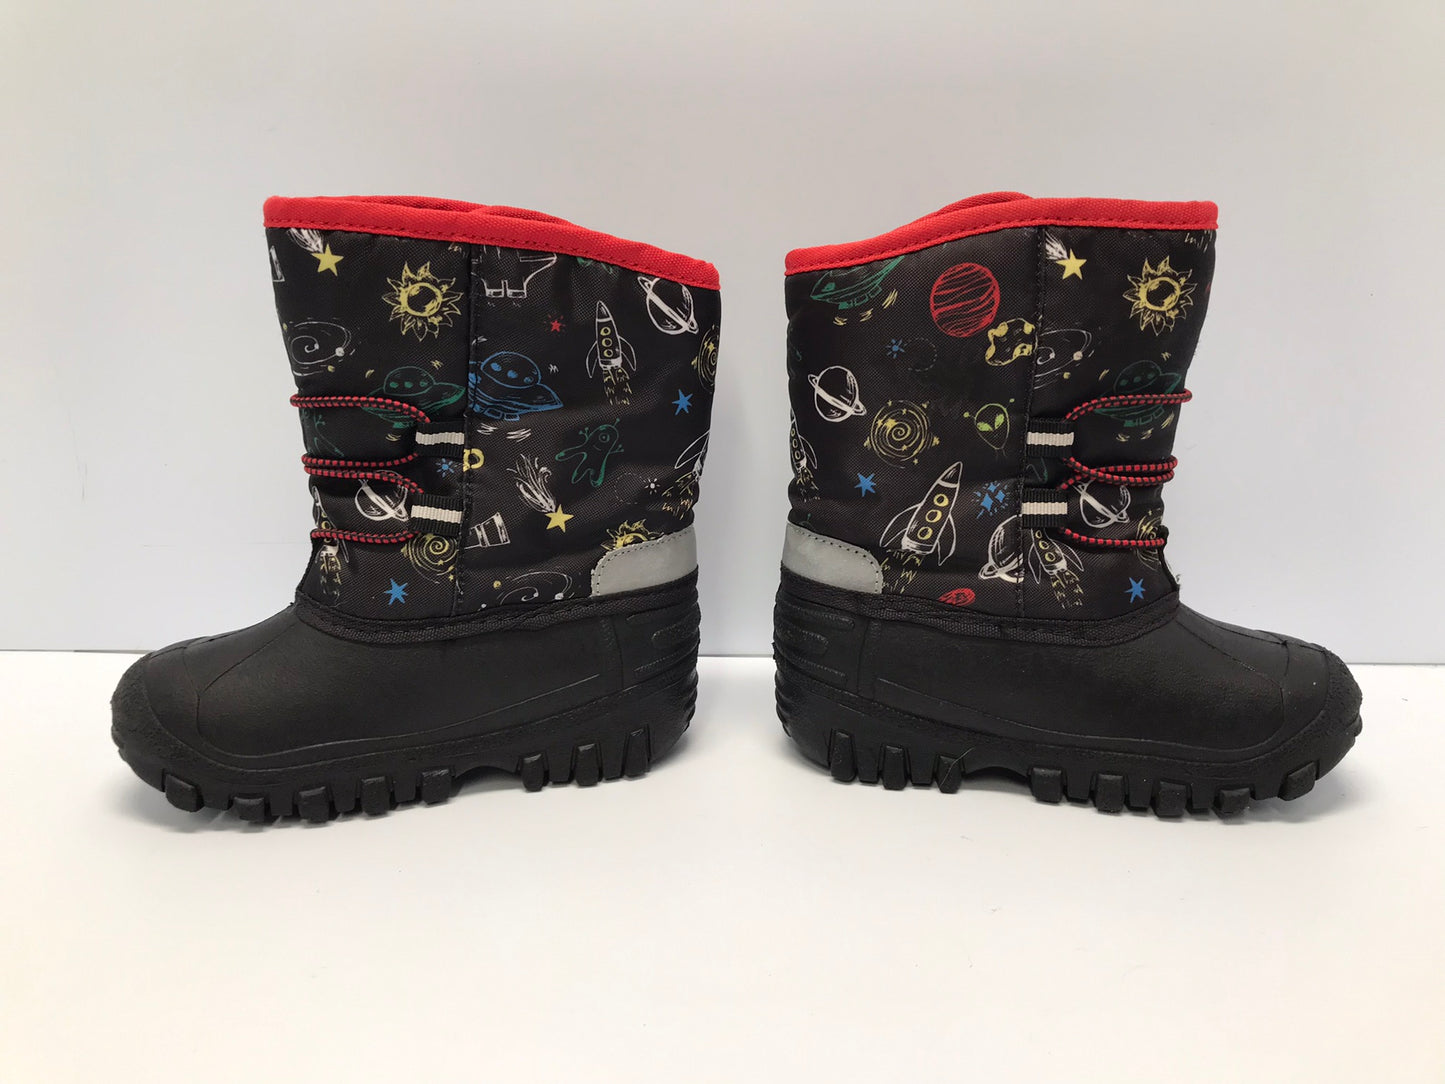 Winter Boots Child Size 10 Shoe Size Canadian Waterproof Black Red As New